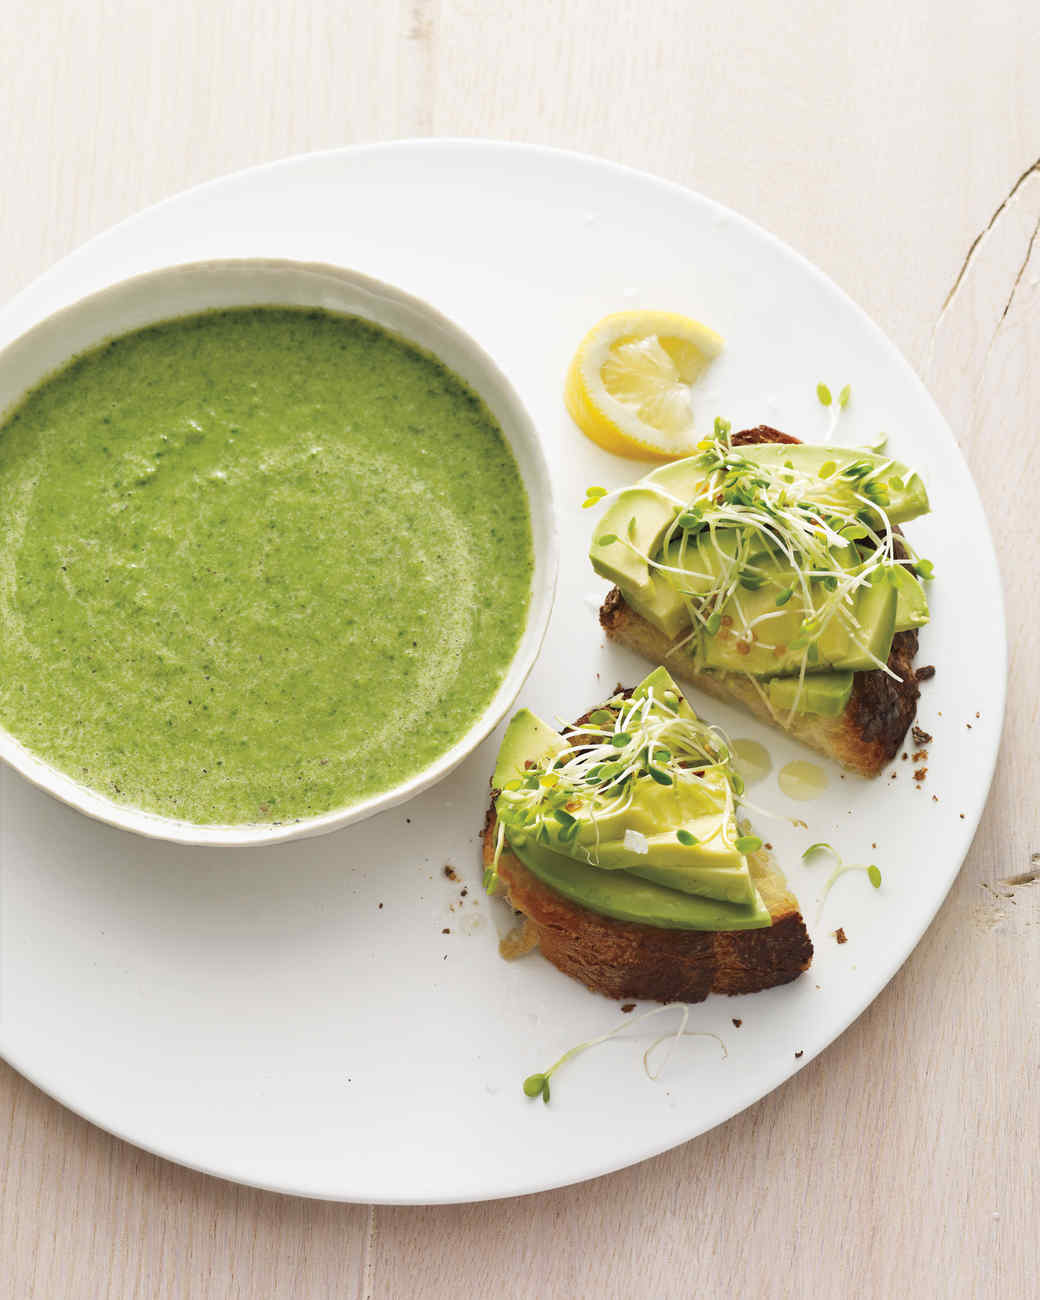 Broccoli-Spinach Soup with Avocado Toasts